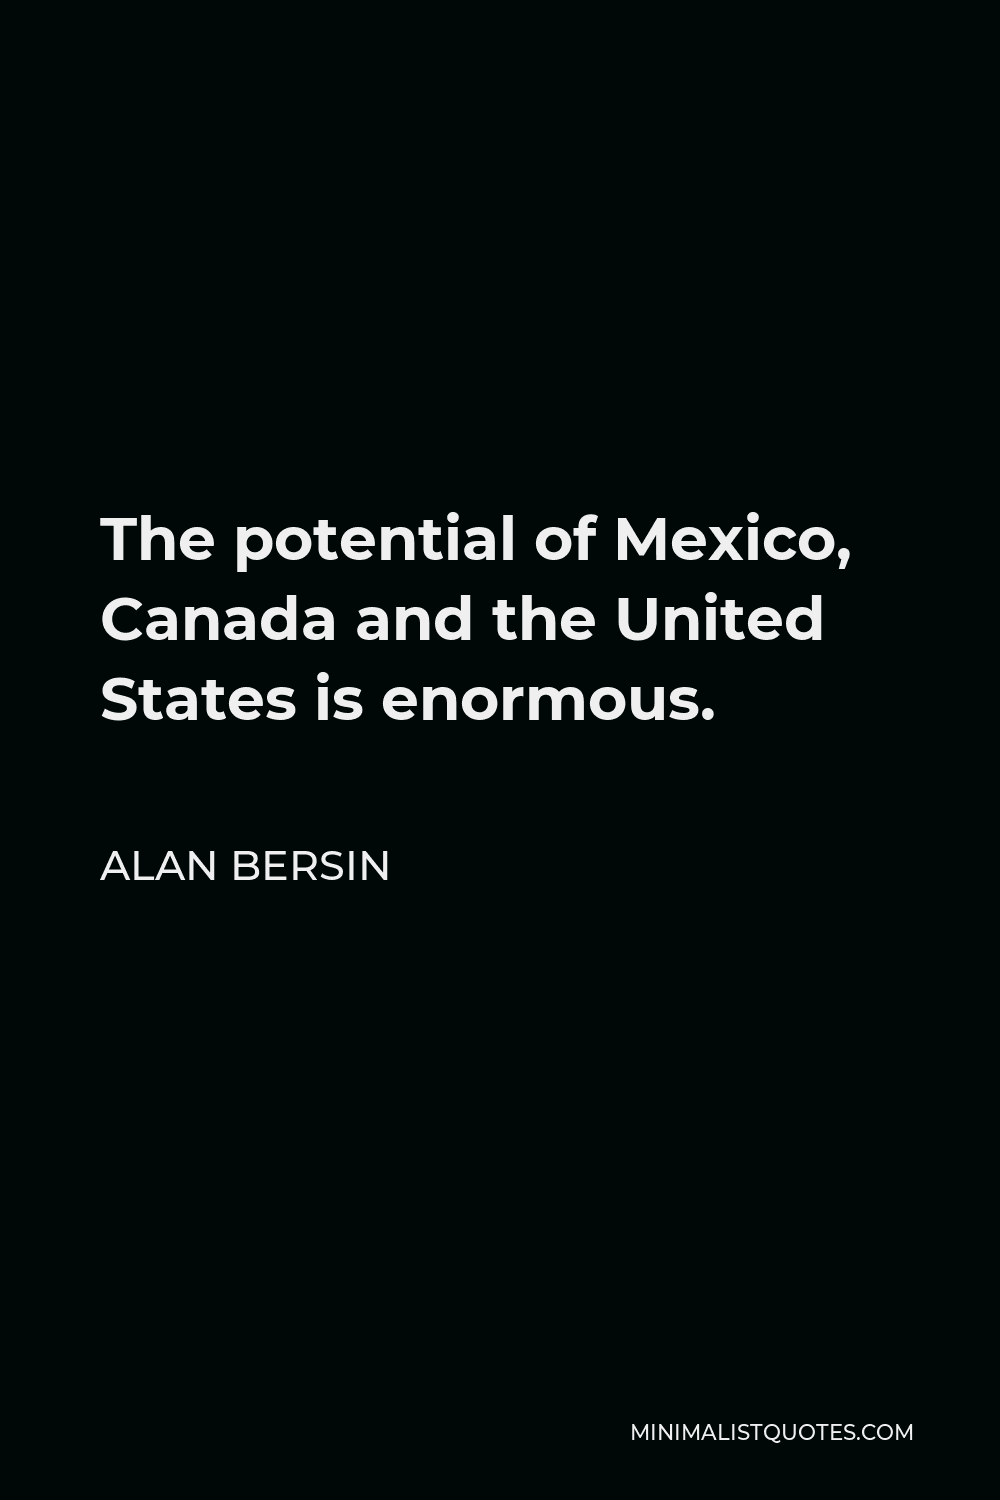 Alan Bersin Quote - The potential of Mexico, Canada and the United States is enormous.